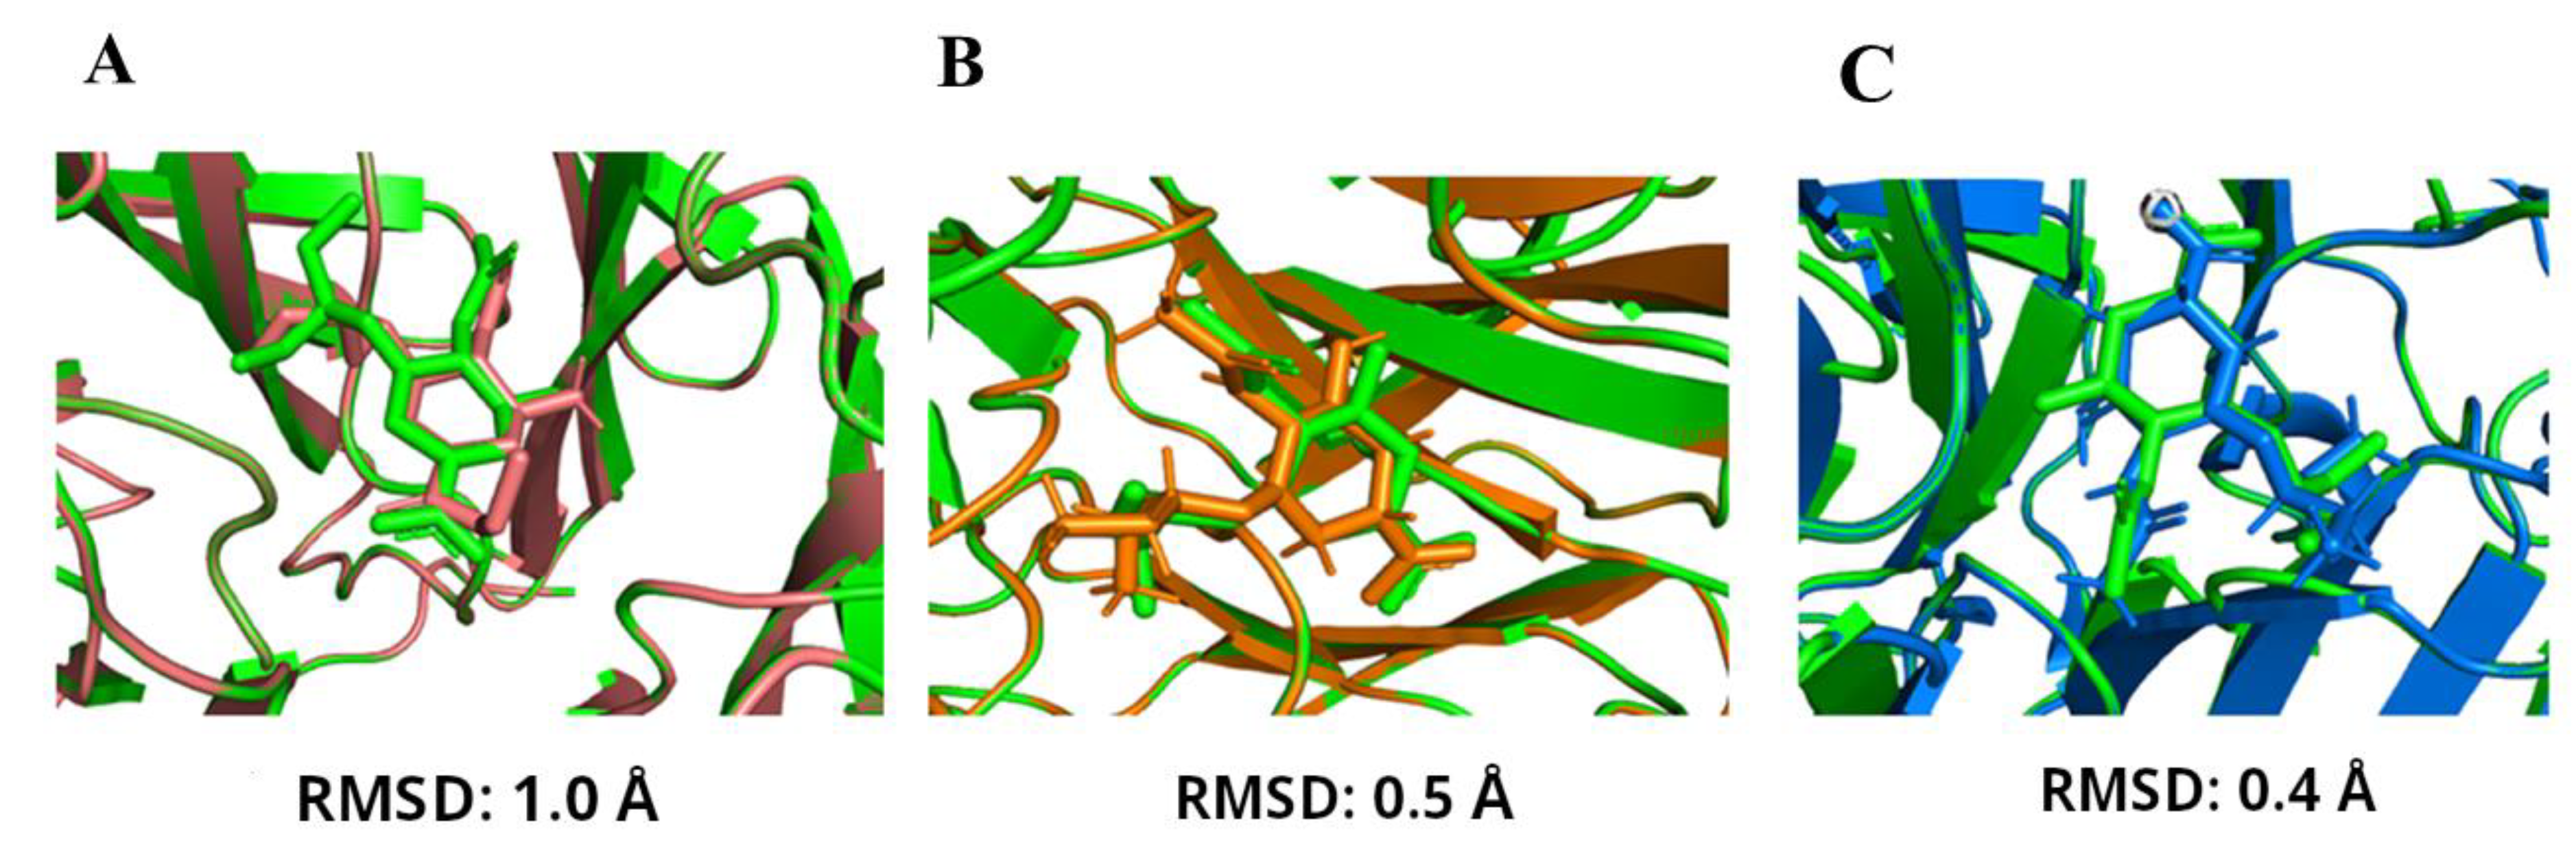 Contour plot showing the interaction of zanamivir and rimantadine